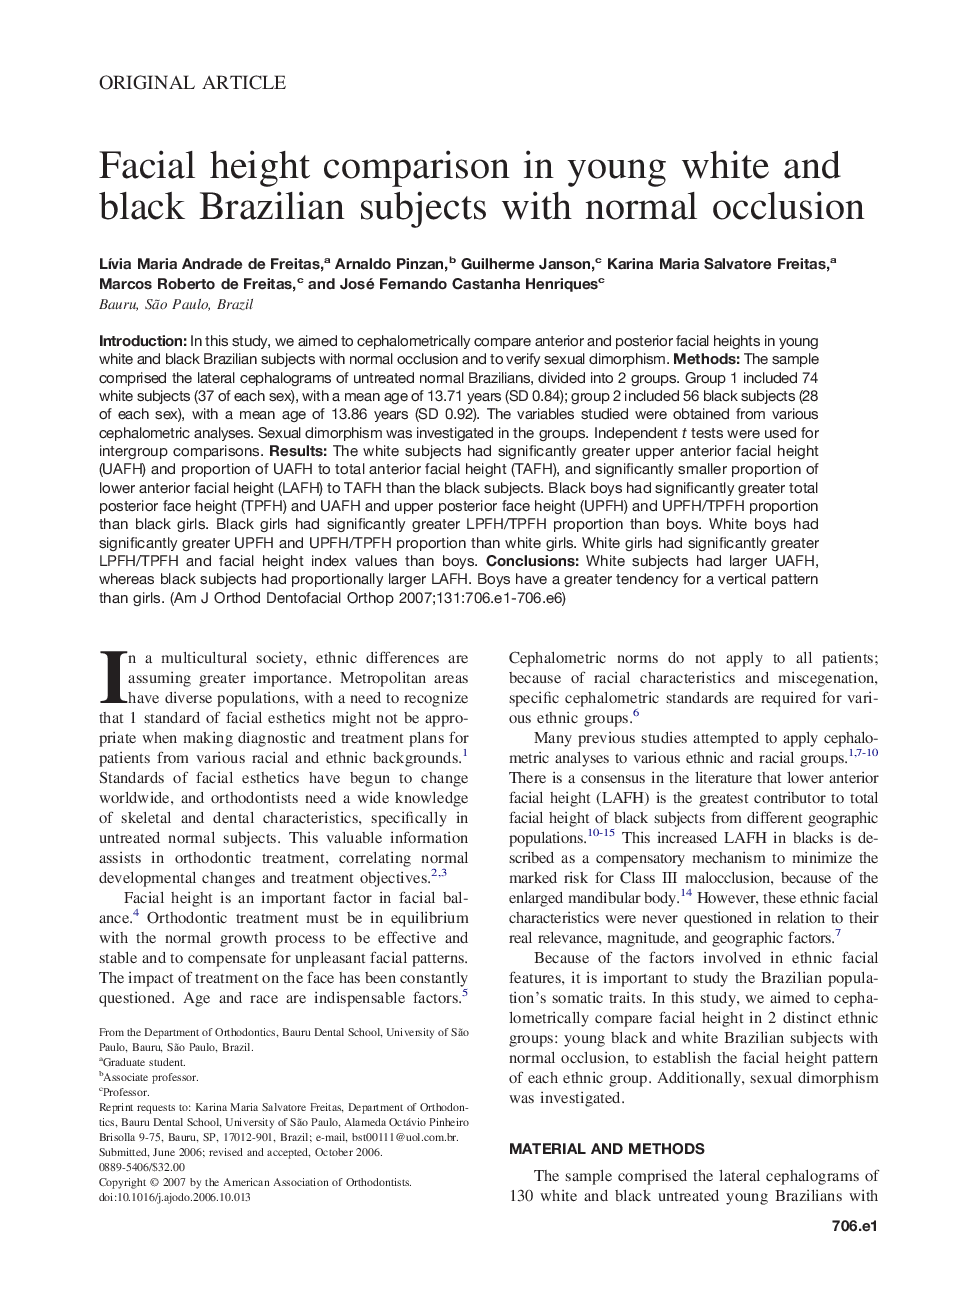 Facial height comparison in young white and black Brazilian subjects with normal occlusion